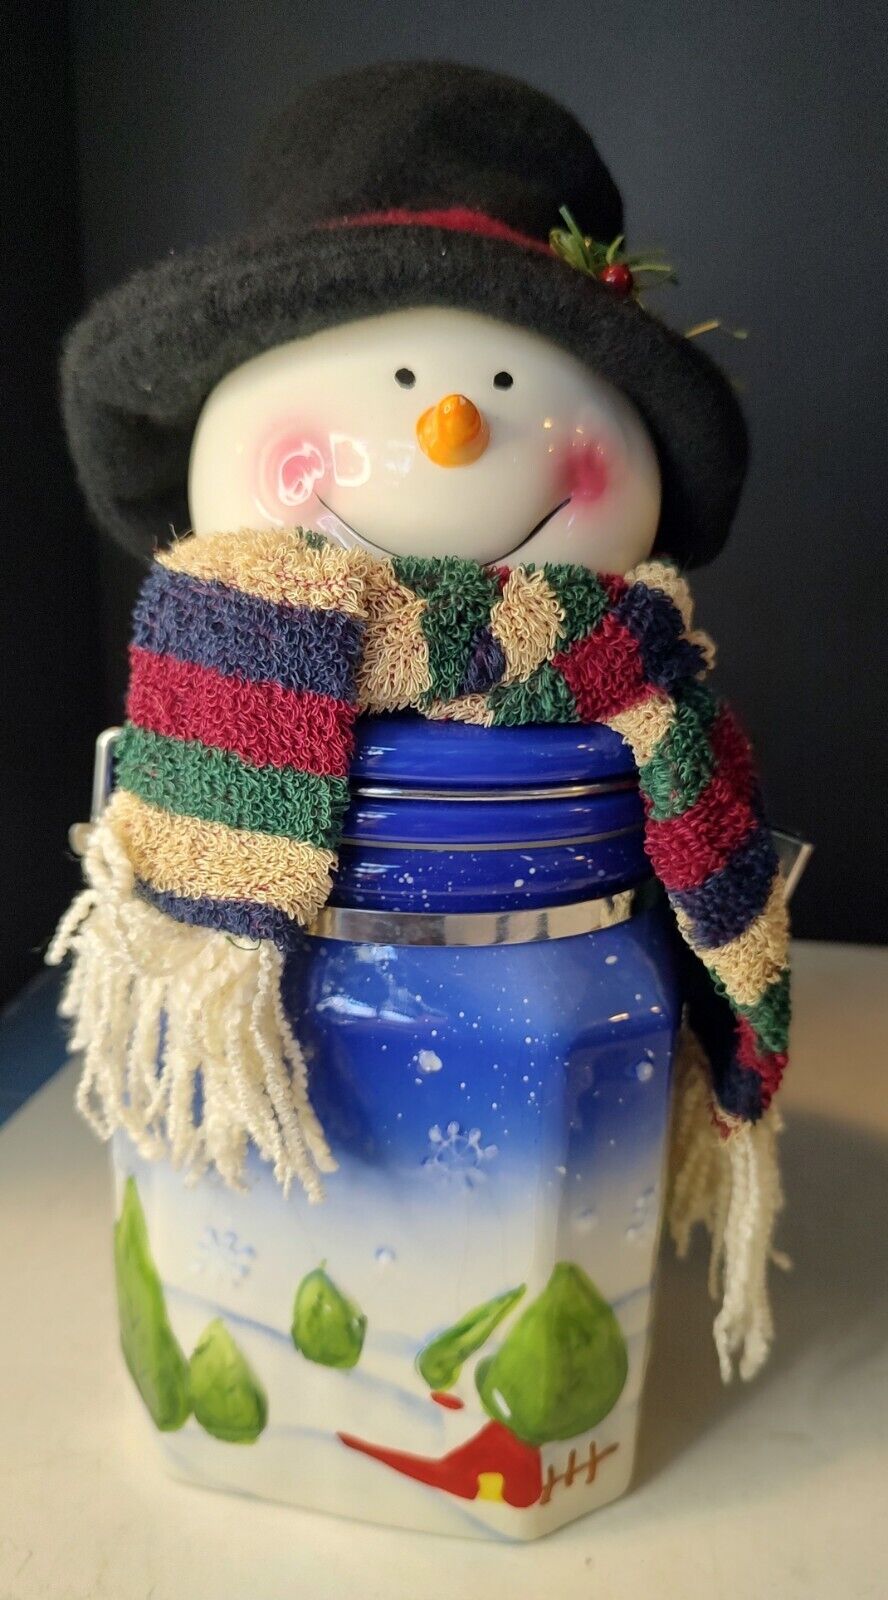 Snowman Ceramic Cookie Jar Winter Scenes Cloth Hat and Scarf Holiday Christmas 